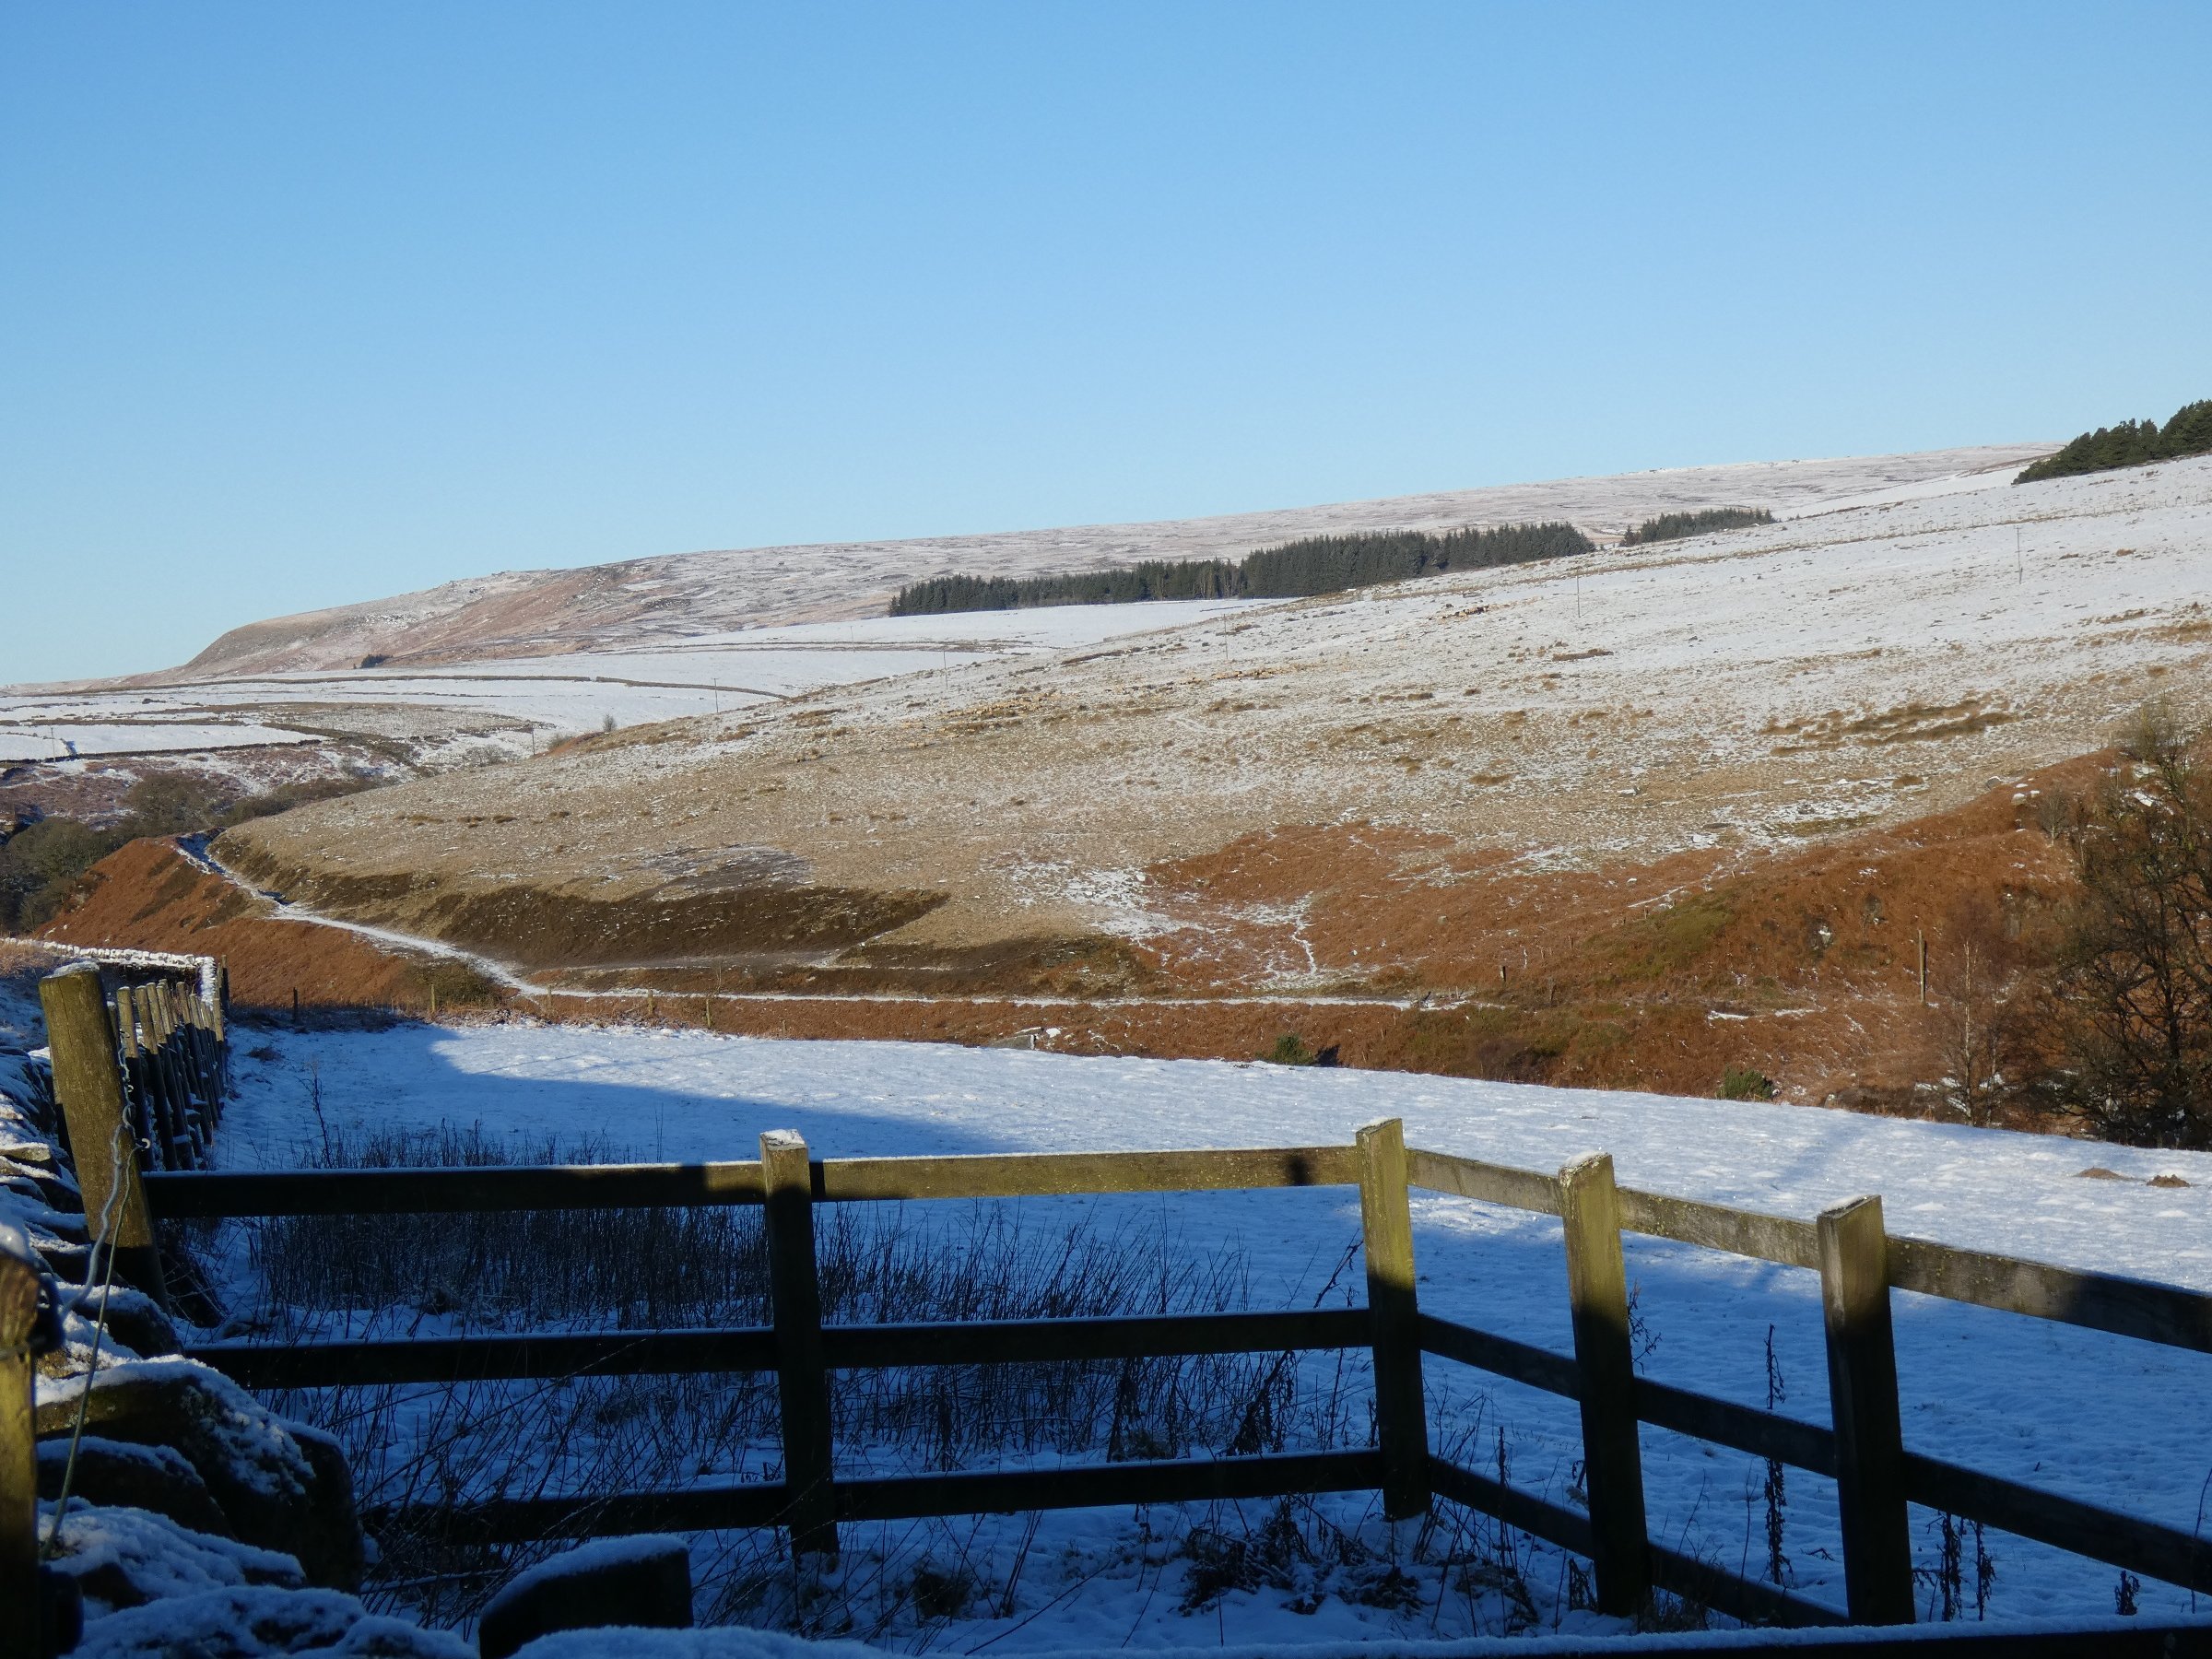 View from National Trust Clough Hole car park towards Widdop Moor